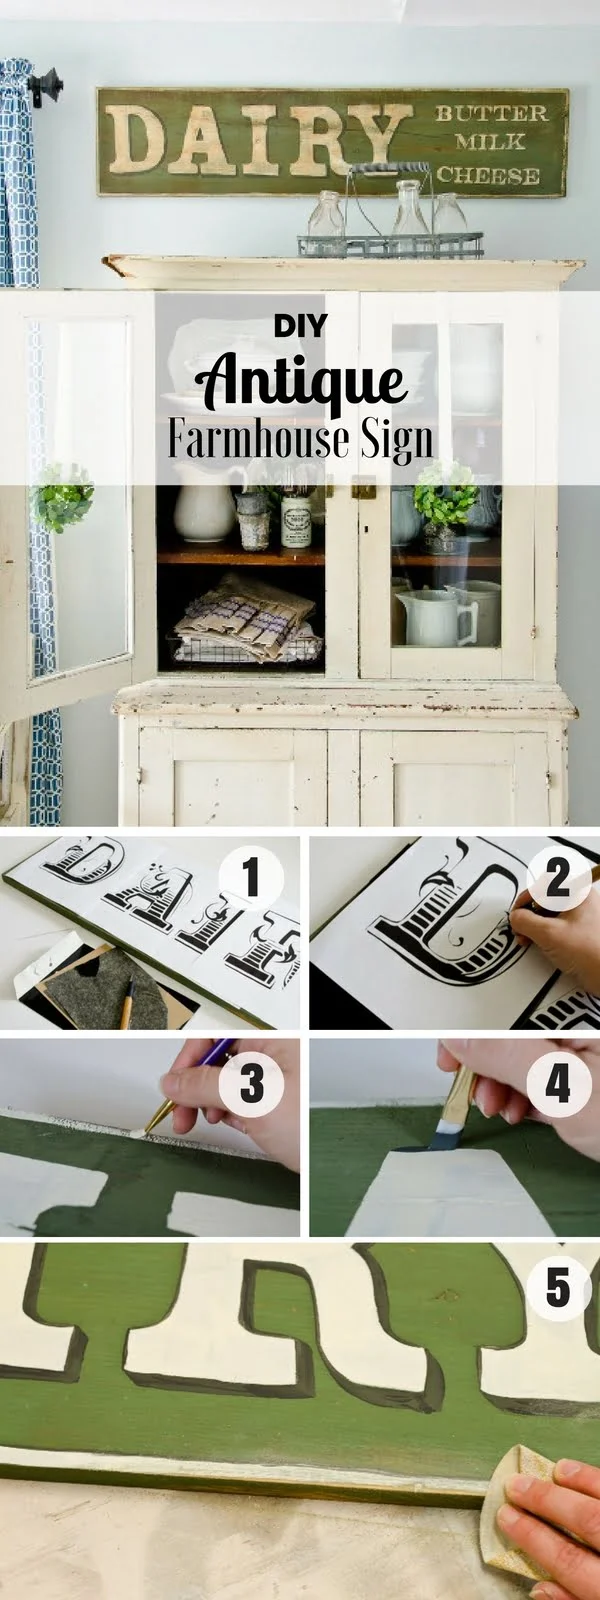 17 Fab DIY Farmhouse Signs You Can Make Yourself - Check out how to make an easy DIY Antique Farmhouse Sign for kitchen decor